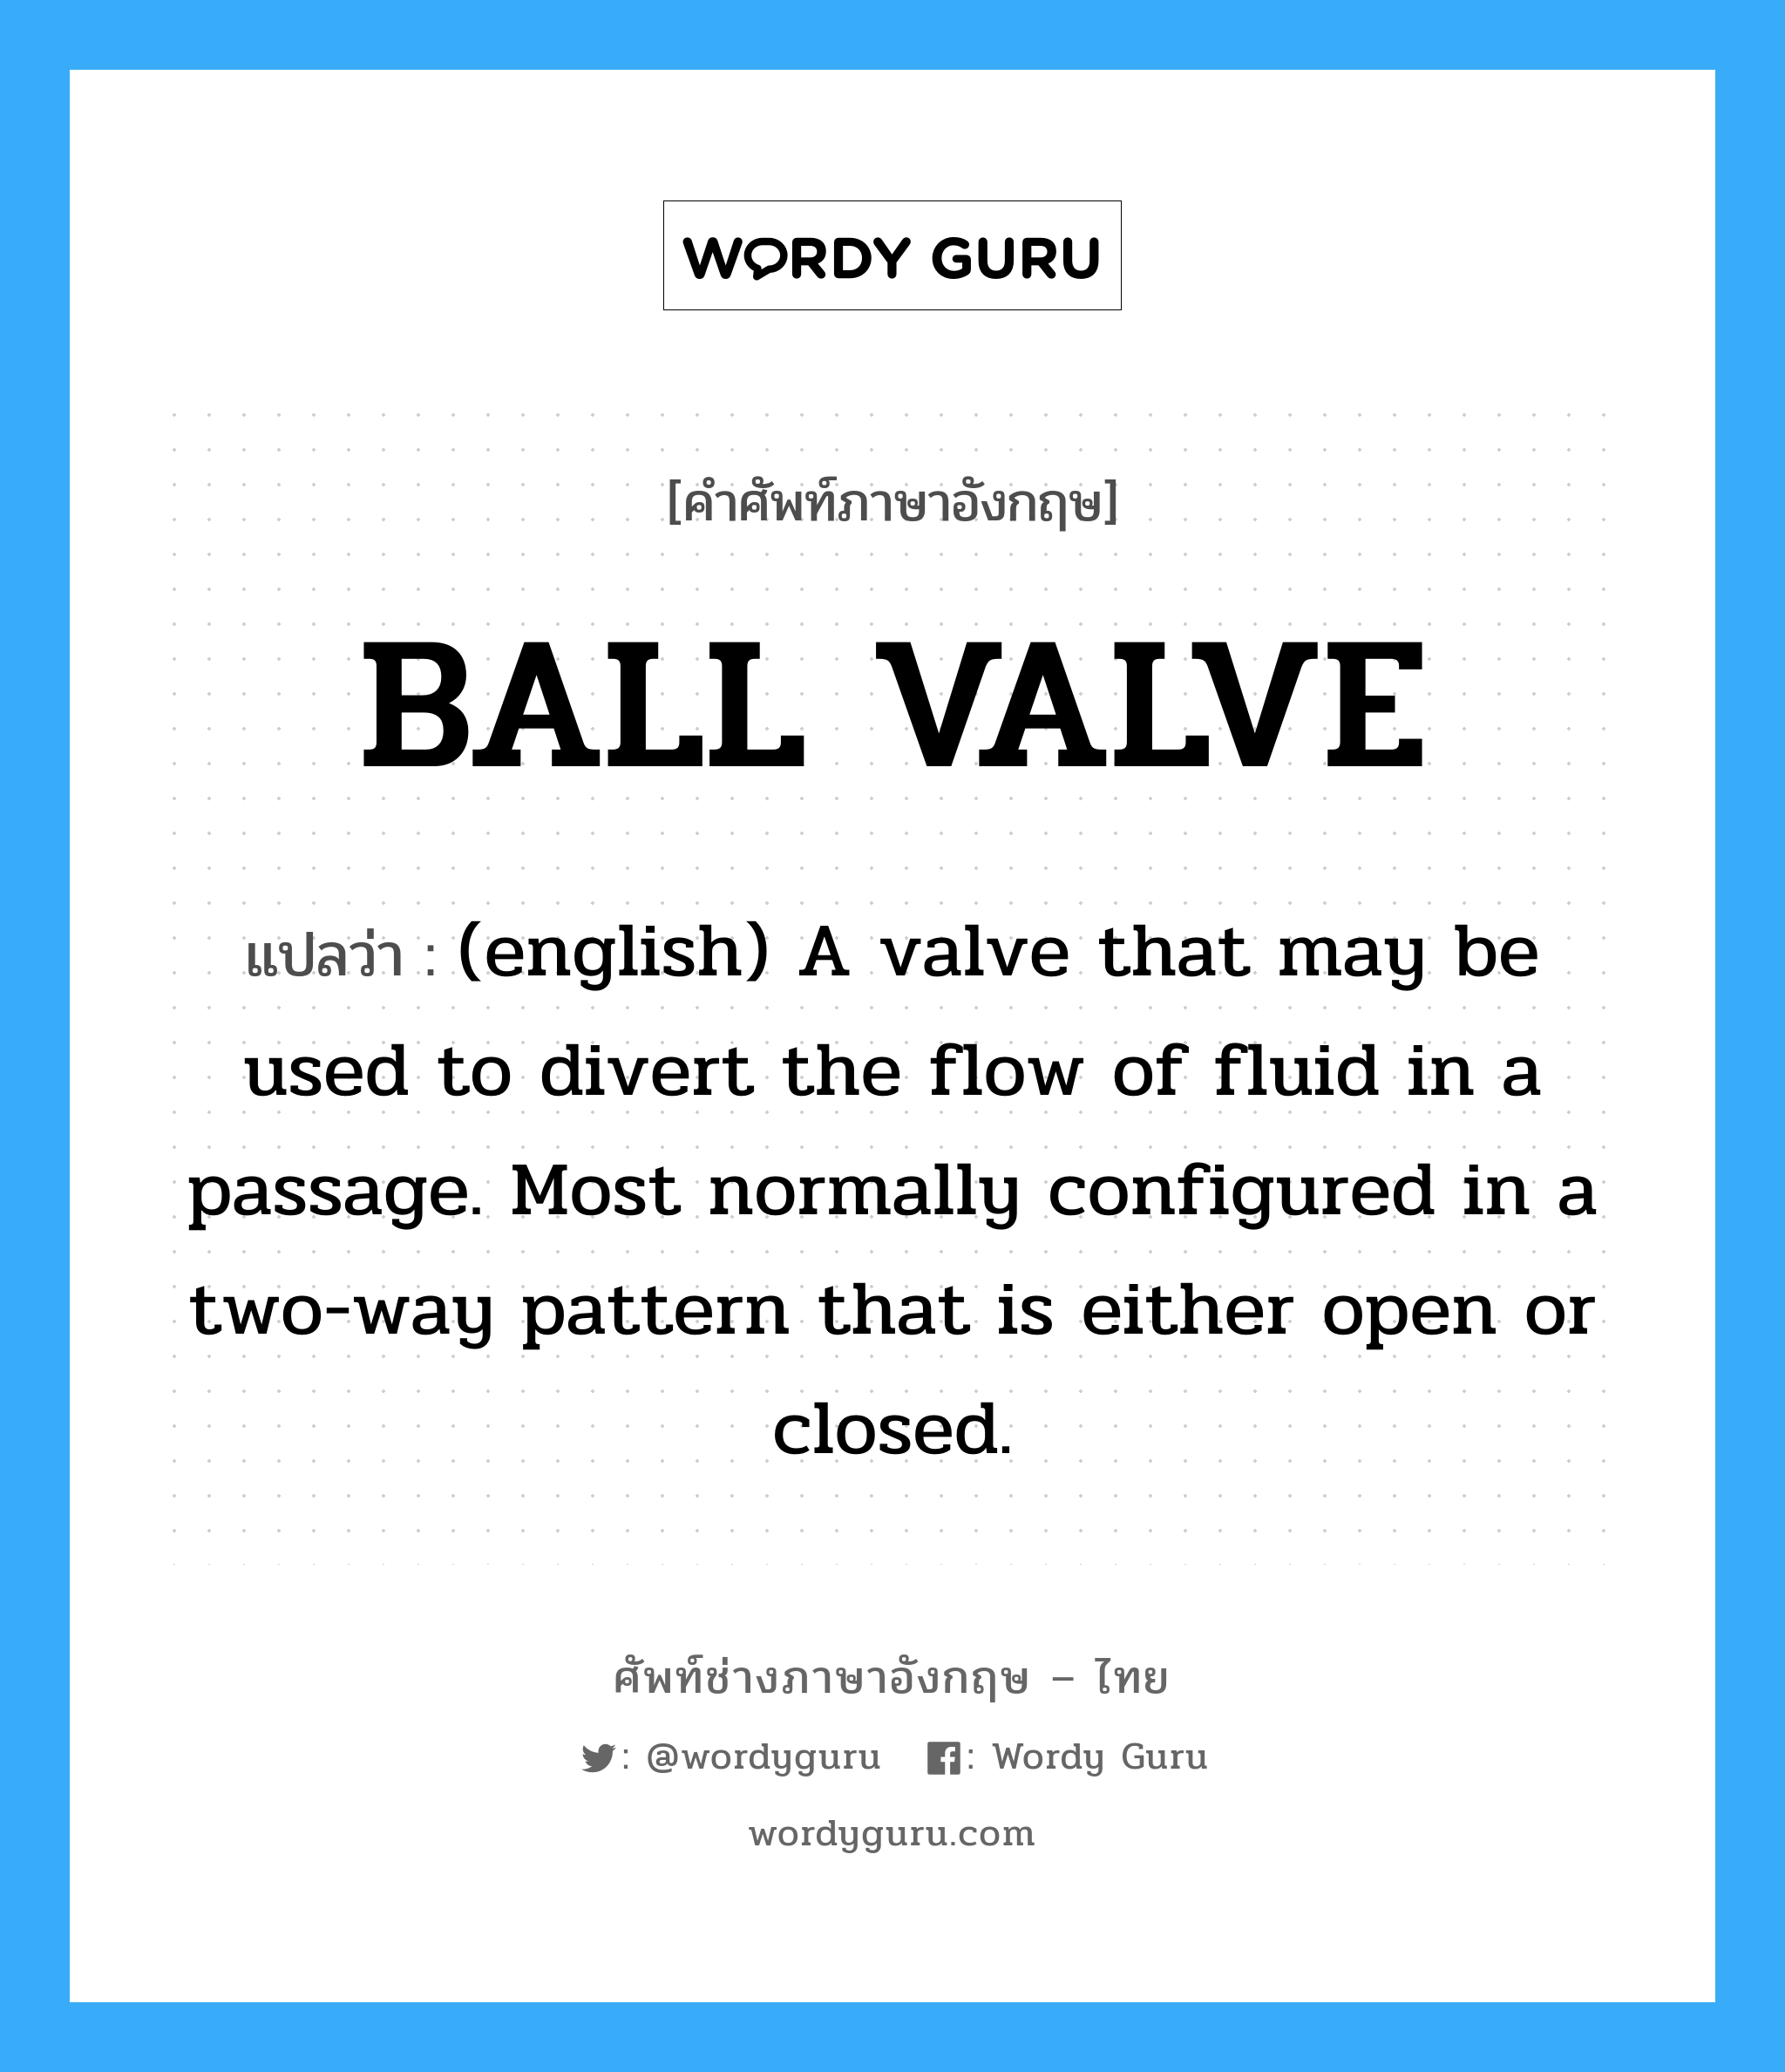 BALL VALVE แปลว่า?, คำศัพท์ช่างภาษาอังกฤษ - ไทย BALL VALVE คำศัพท์ภาษาอังกฤษ BALL VALVE แปลว่า (english) A valve that may be used to divert the flow of fluid in a passage. Most normally configured in a two-way pattern that is either open or closed.